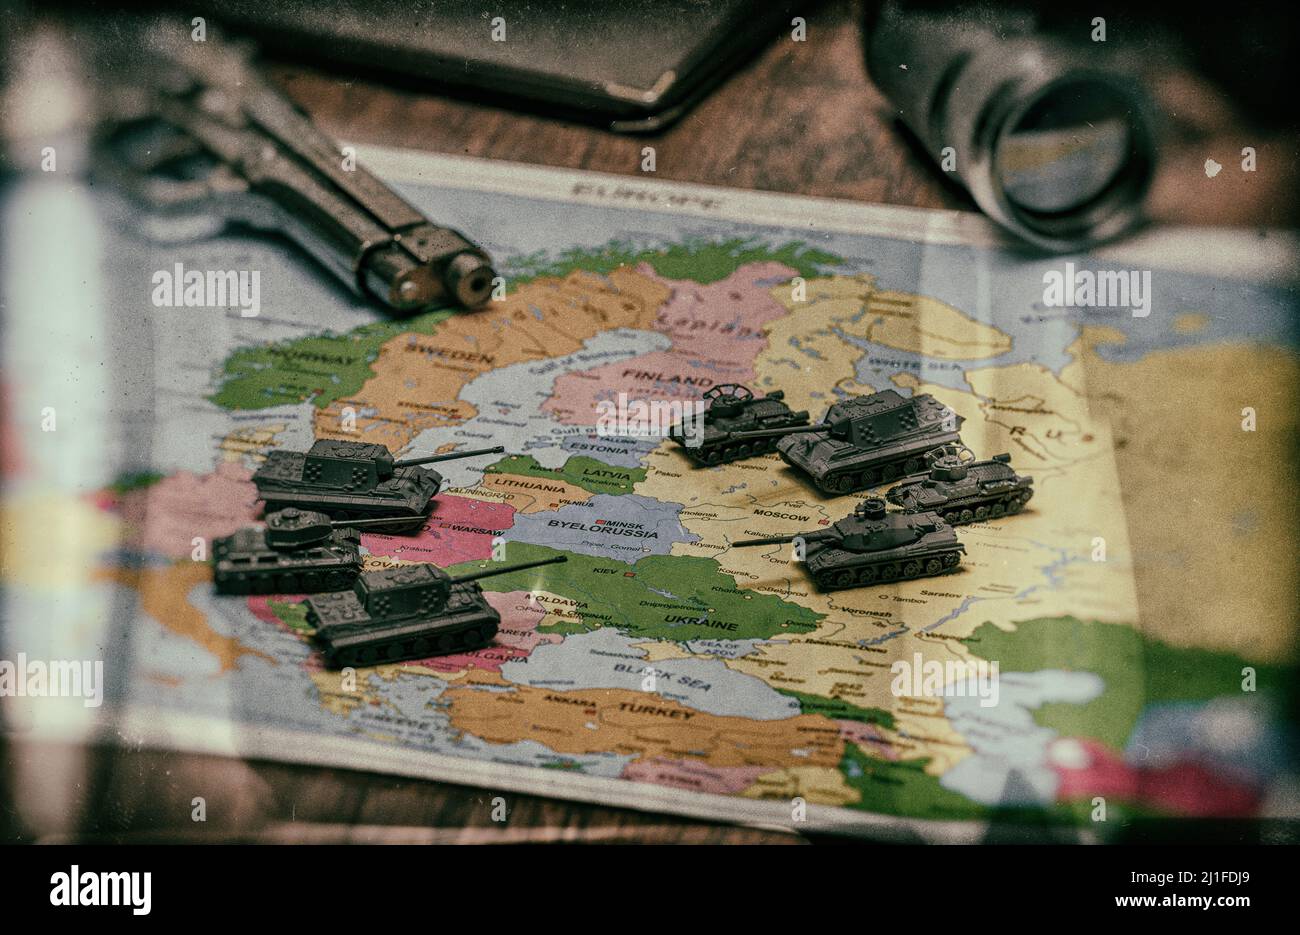 Toy tanks on the map. Concept of confrontation between NATO and Russia. Stock Photo